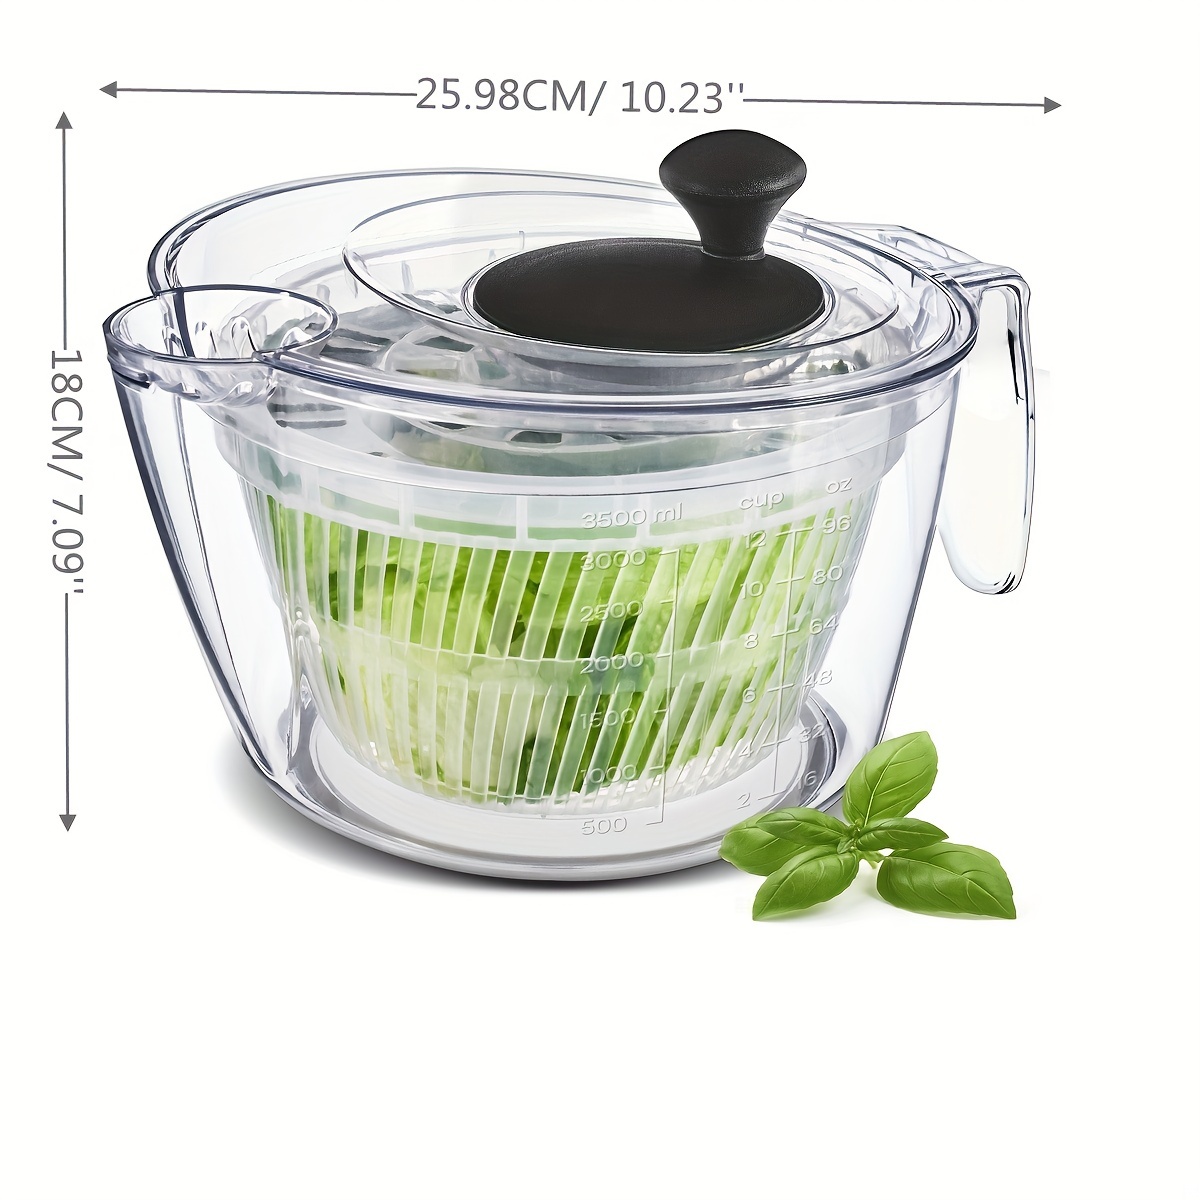  Joined Small Salad Spinner with Rotary Handle, Measuring Jug  and Colander - Quick and Easy Multi-Use Lettuce Spinner, Vegetable Dryer,  Fruit Washer, Pasta and Fries Spinner - 3.7 Qt: Home 